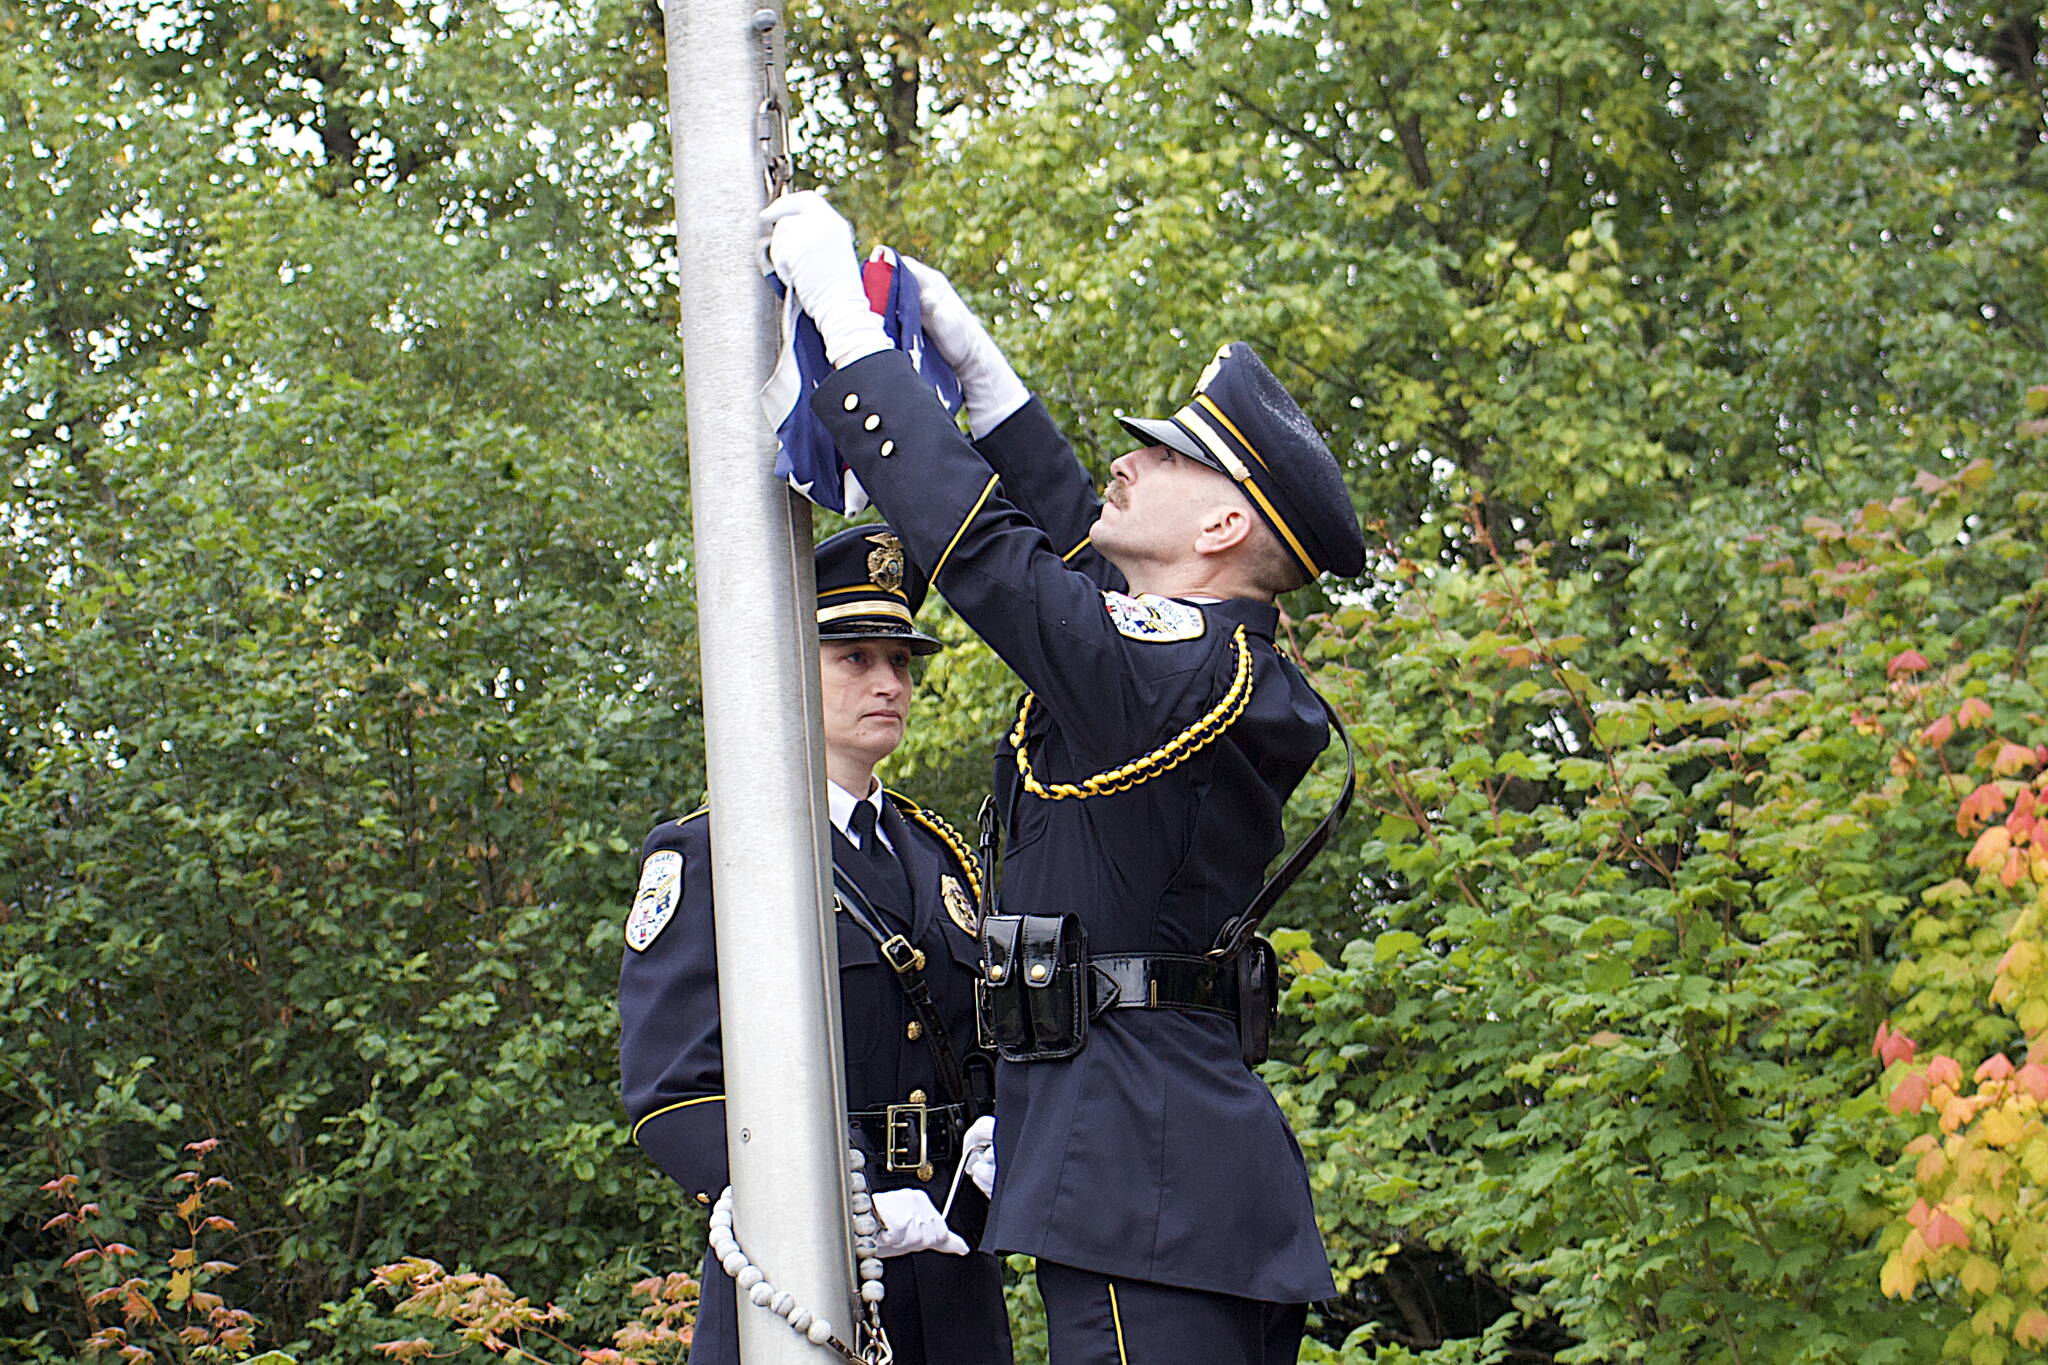 Mattie and Ron Shriver of the Juneau Police Department prepare to hoist the flag to half-mast during a ceremony Monday at the September 11th Memorial at Riverside Rotary Park commemorating the terrorist attacks on that date in 2001. (Mark Sabbatini / Juneau Empire)